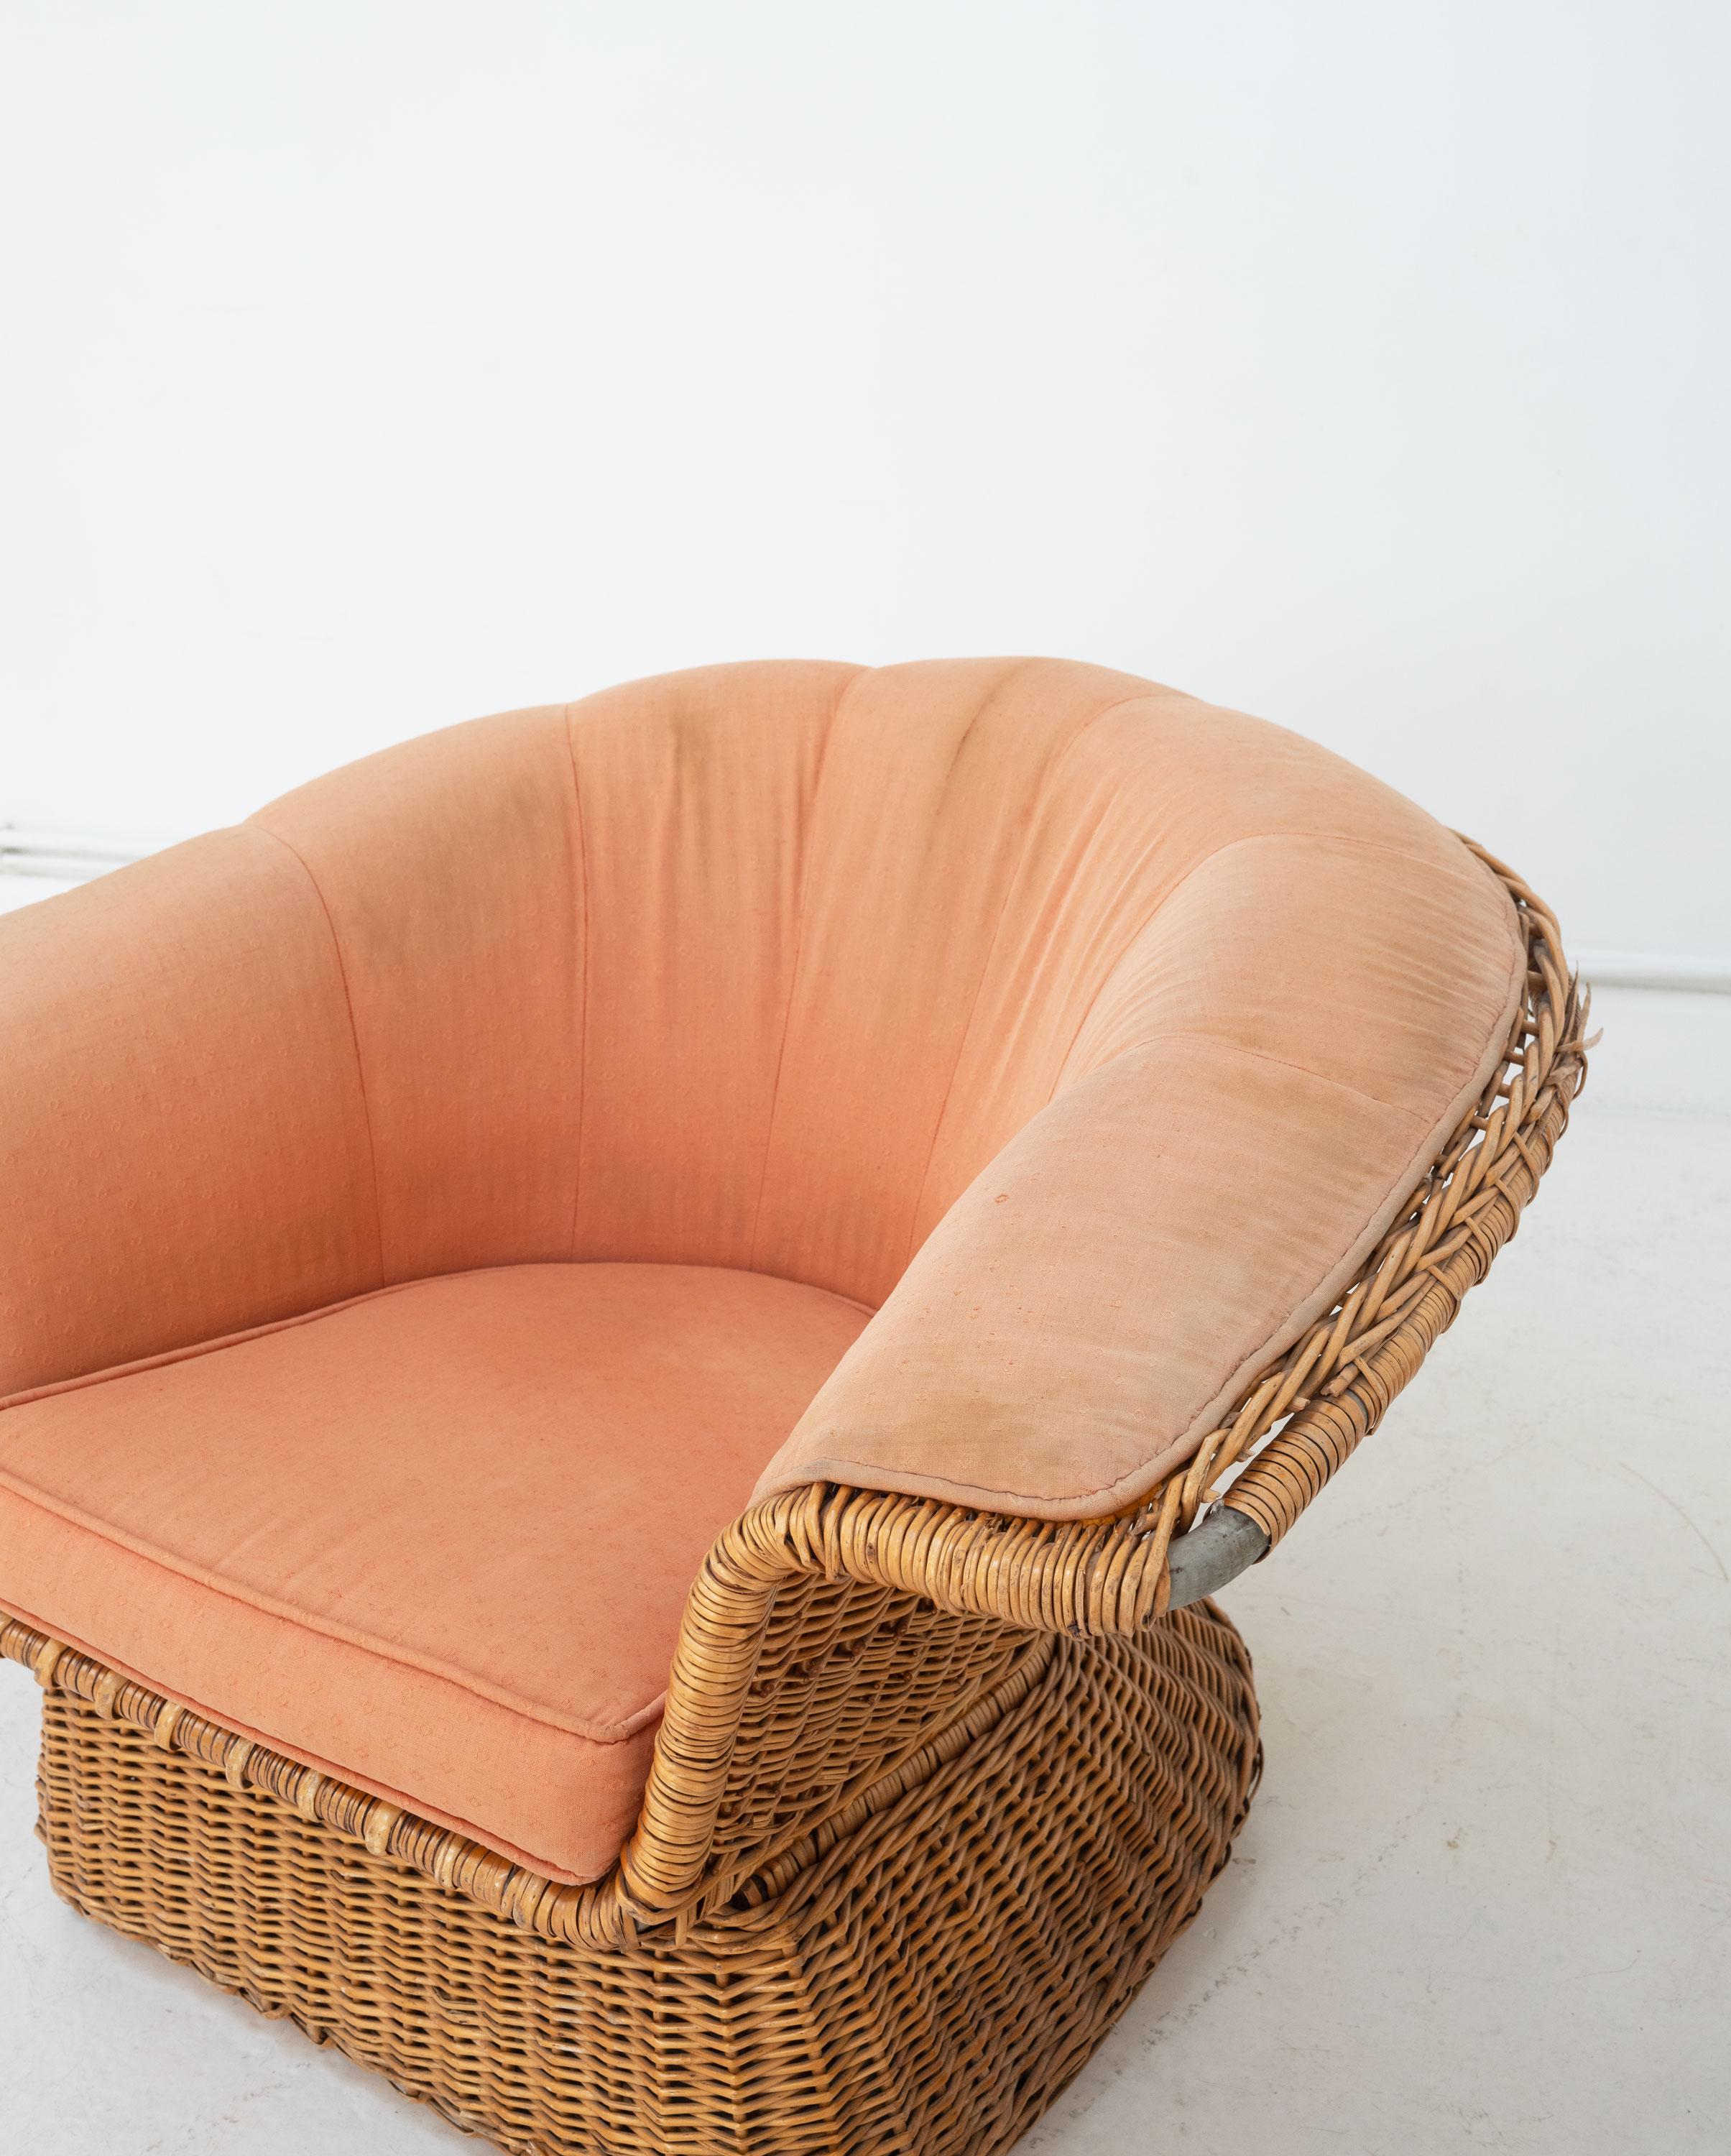 A Pair of Wicker Armchairs by Lyda Levi for McGuire, c.1970 For Sale 3